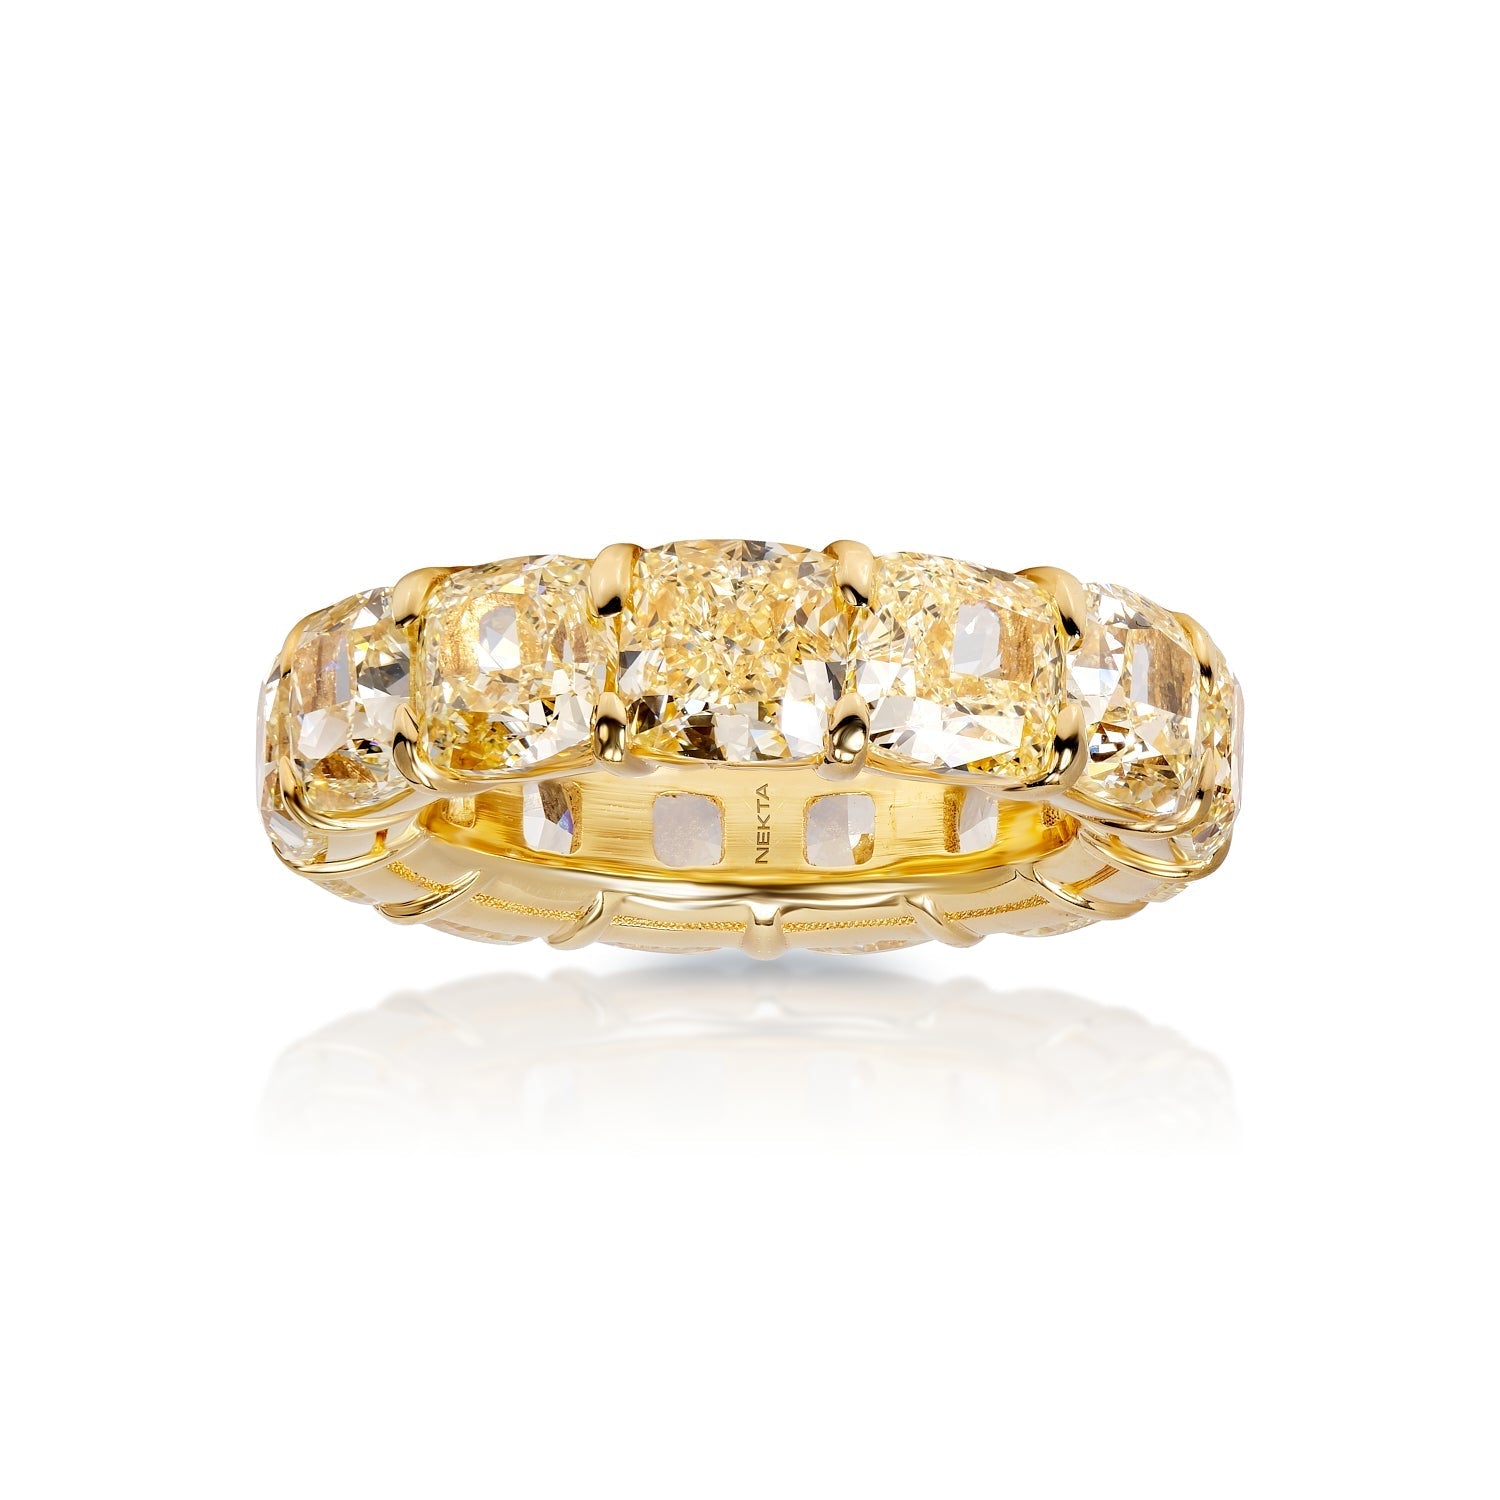 Cushion Cut Yellow Diamond Eternity Band 14 Carat  Shared Prong Ring in 18K Yellow Gold Front View